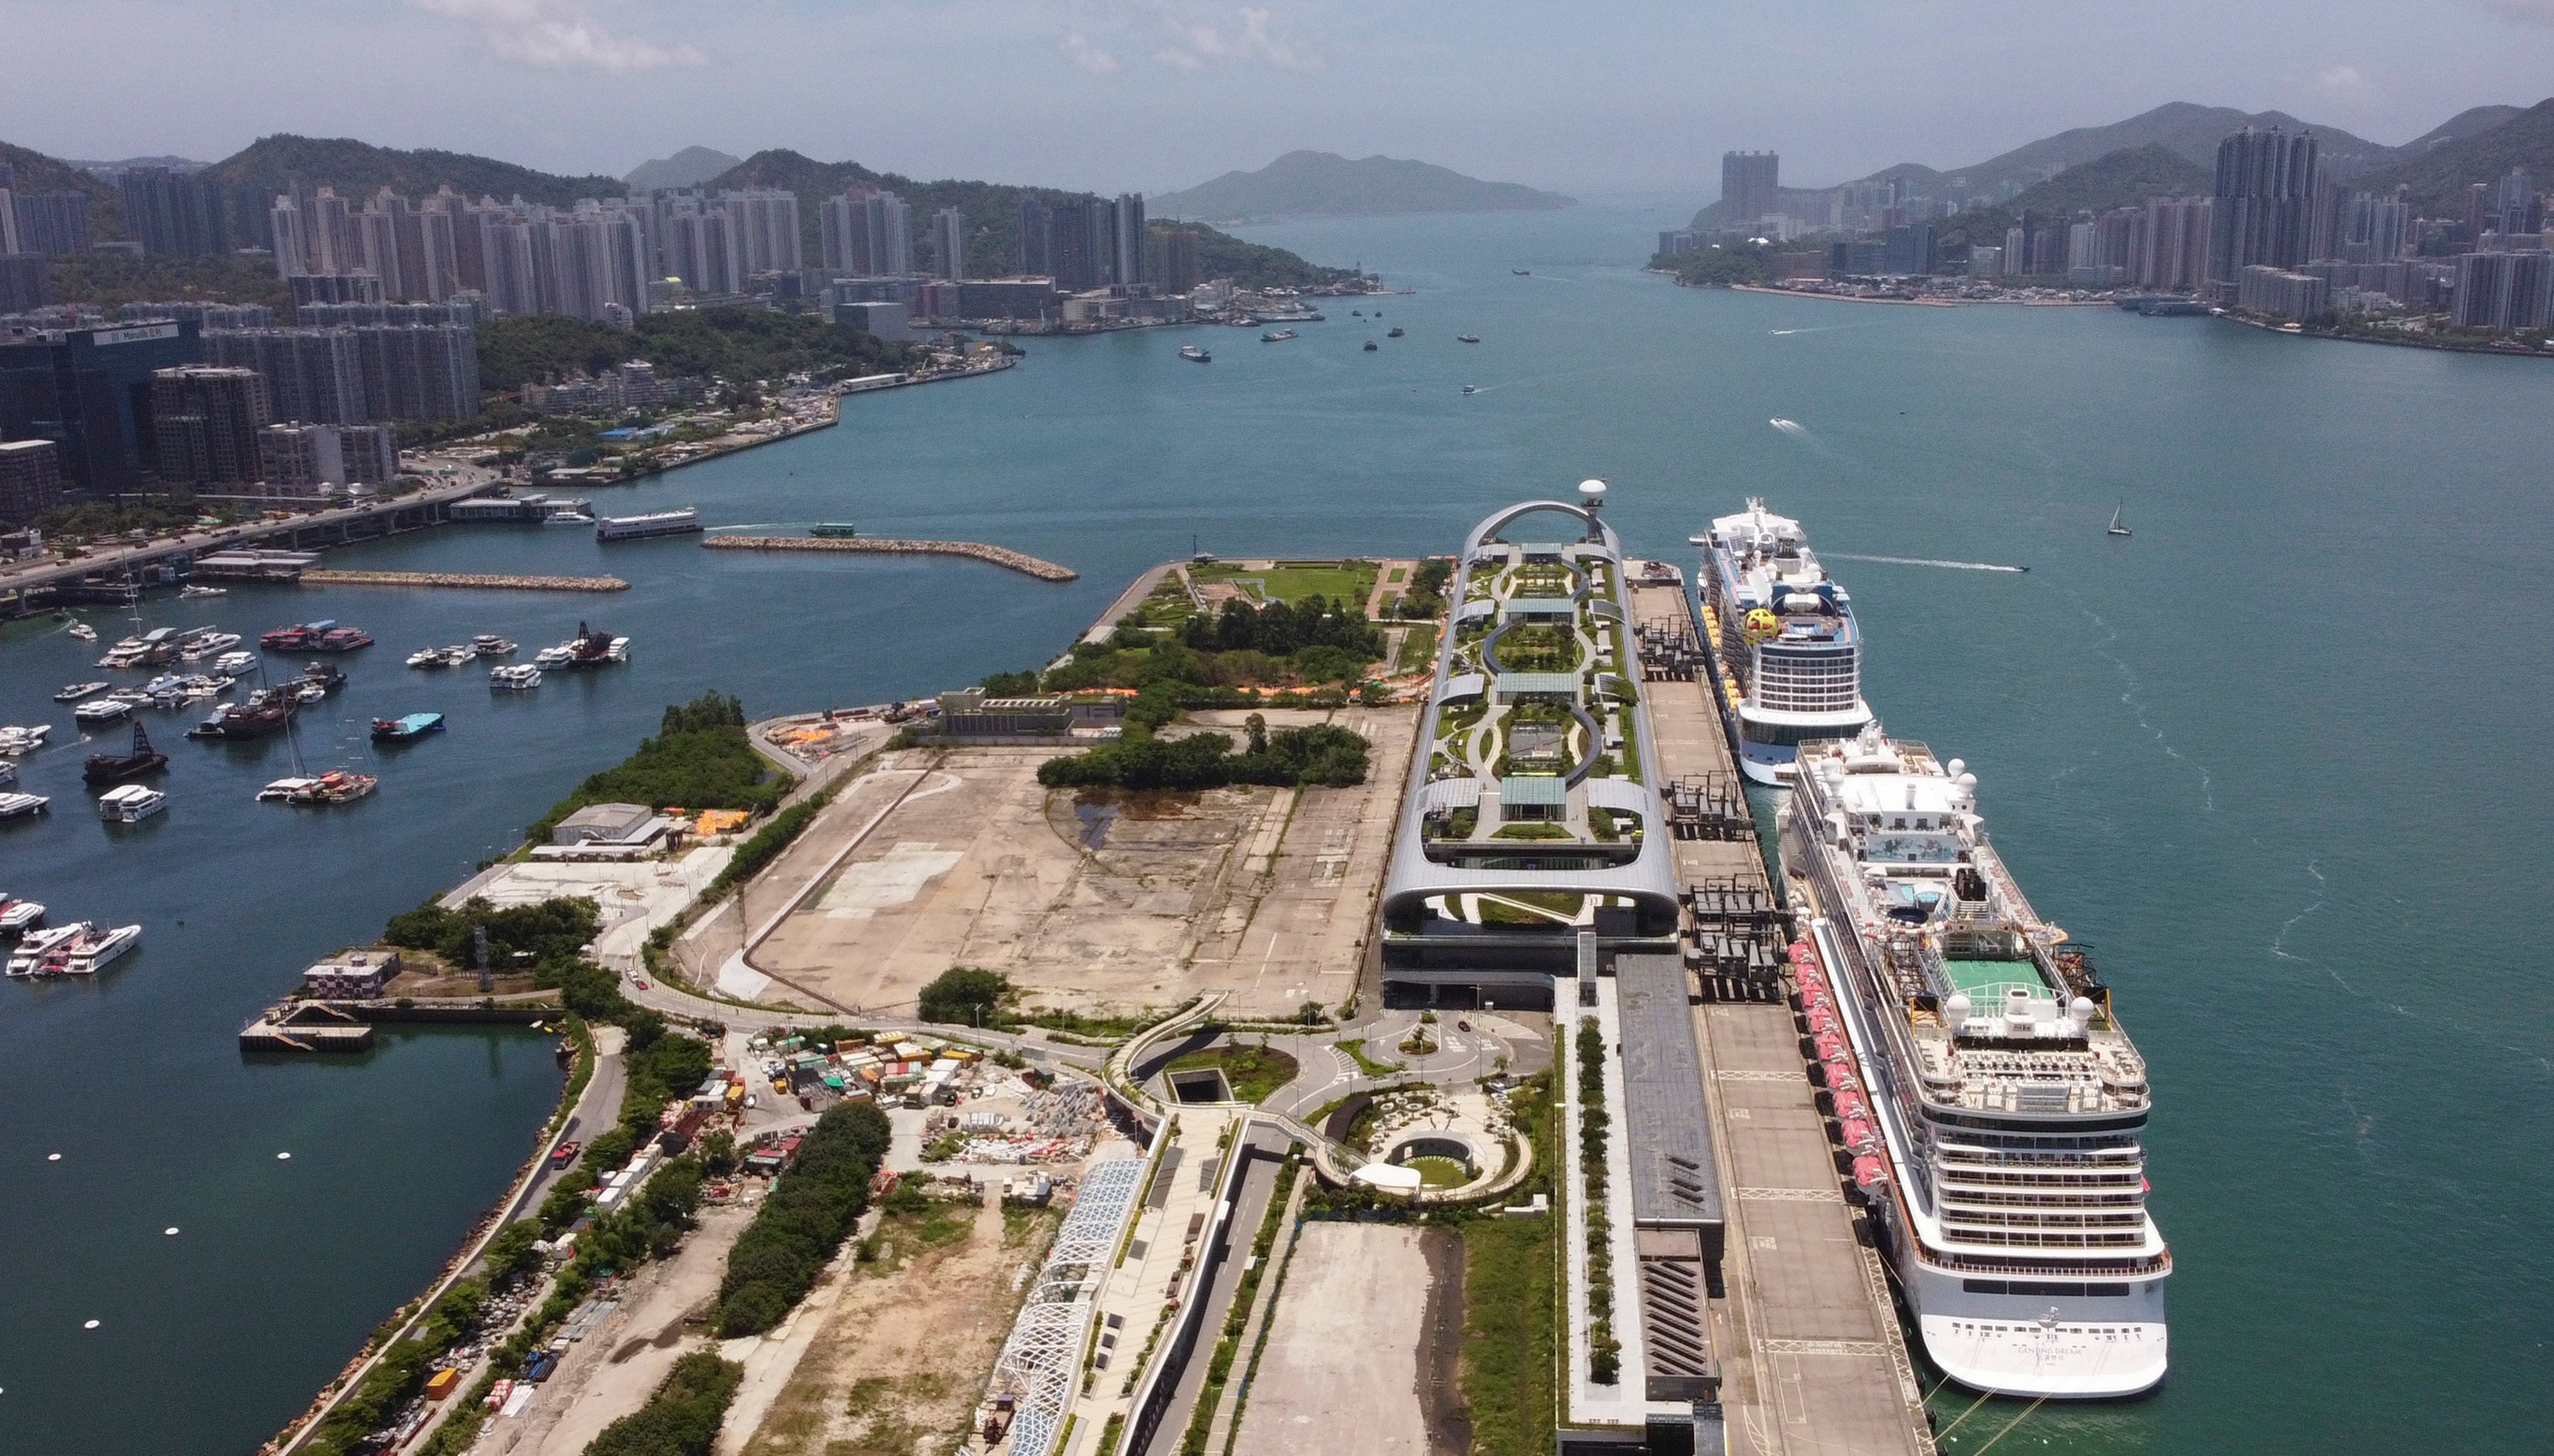 The Kai Tak Cruise Terminal, which opened on the site of Hong Kong’s former airport in 2013. Photo: Martin Chan